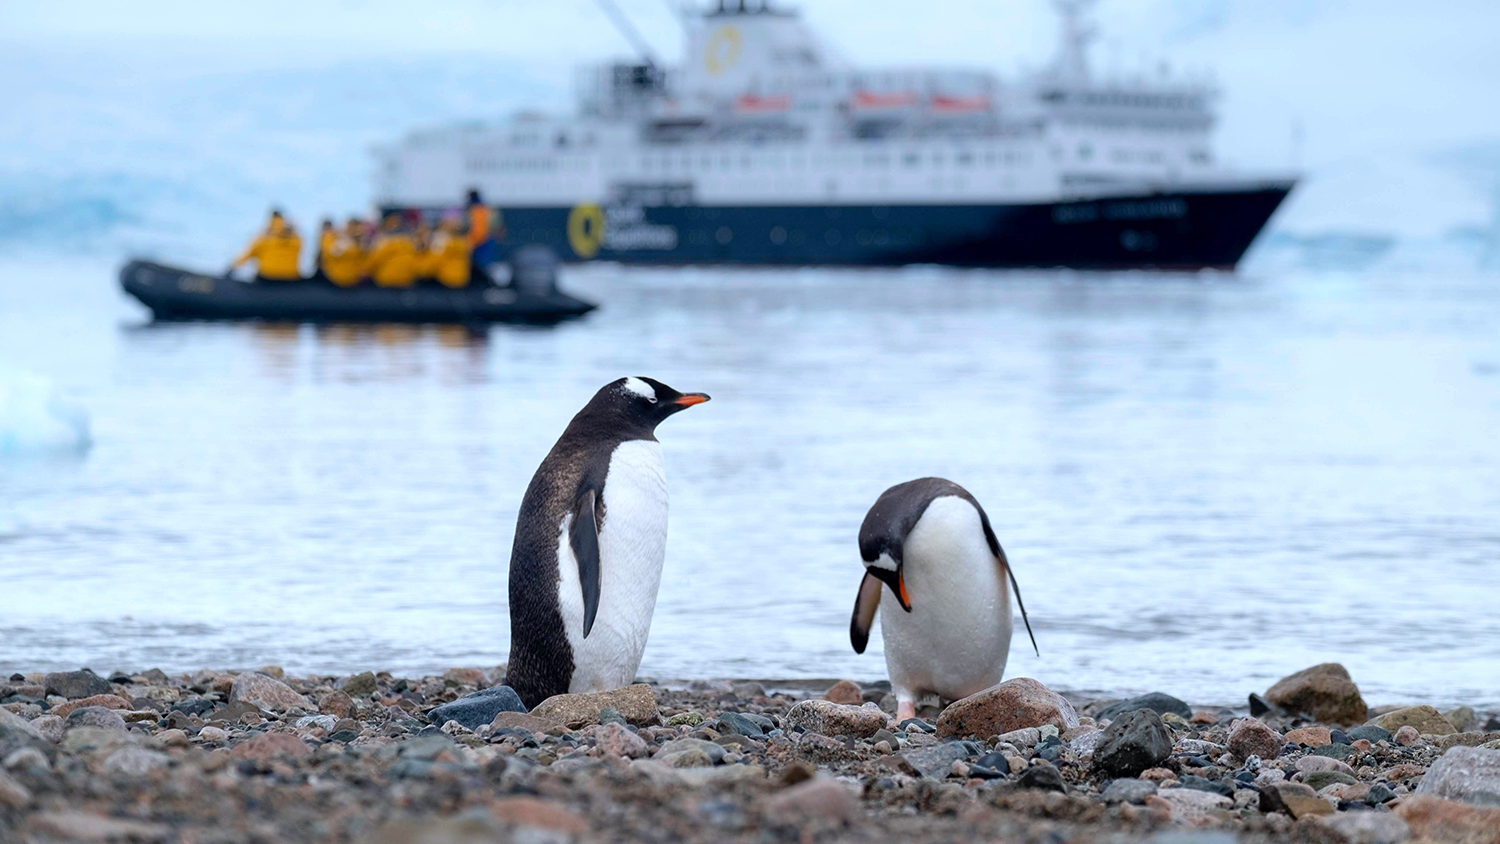 Gentoo penguins standing on a stony beach with a ship in the background - Antarctica's Tourism Boom Could Be Stressing Out Penguins - College of Natural Resources News NC State University